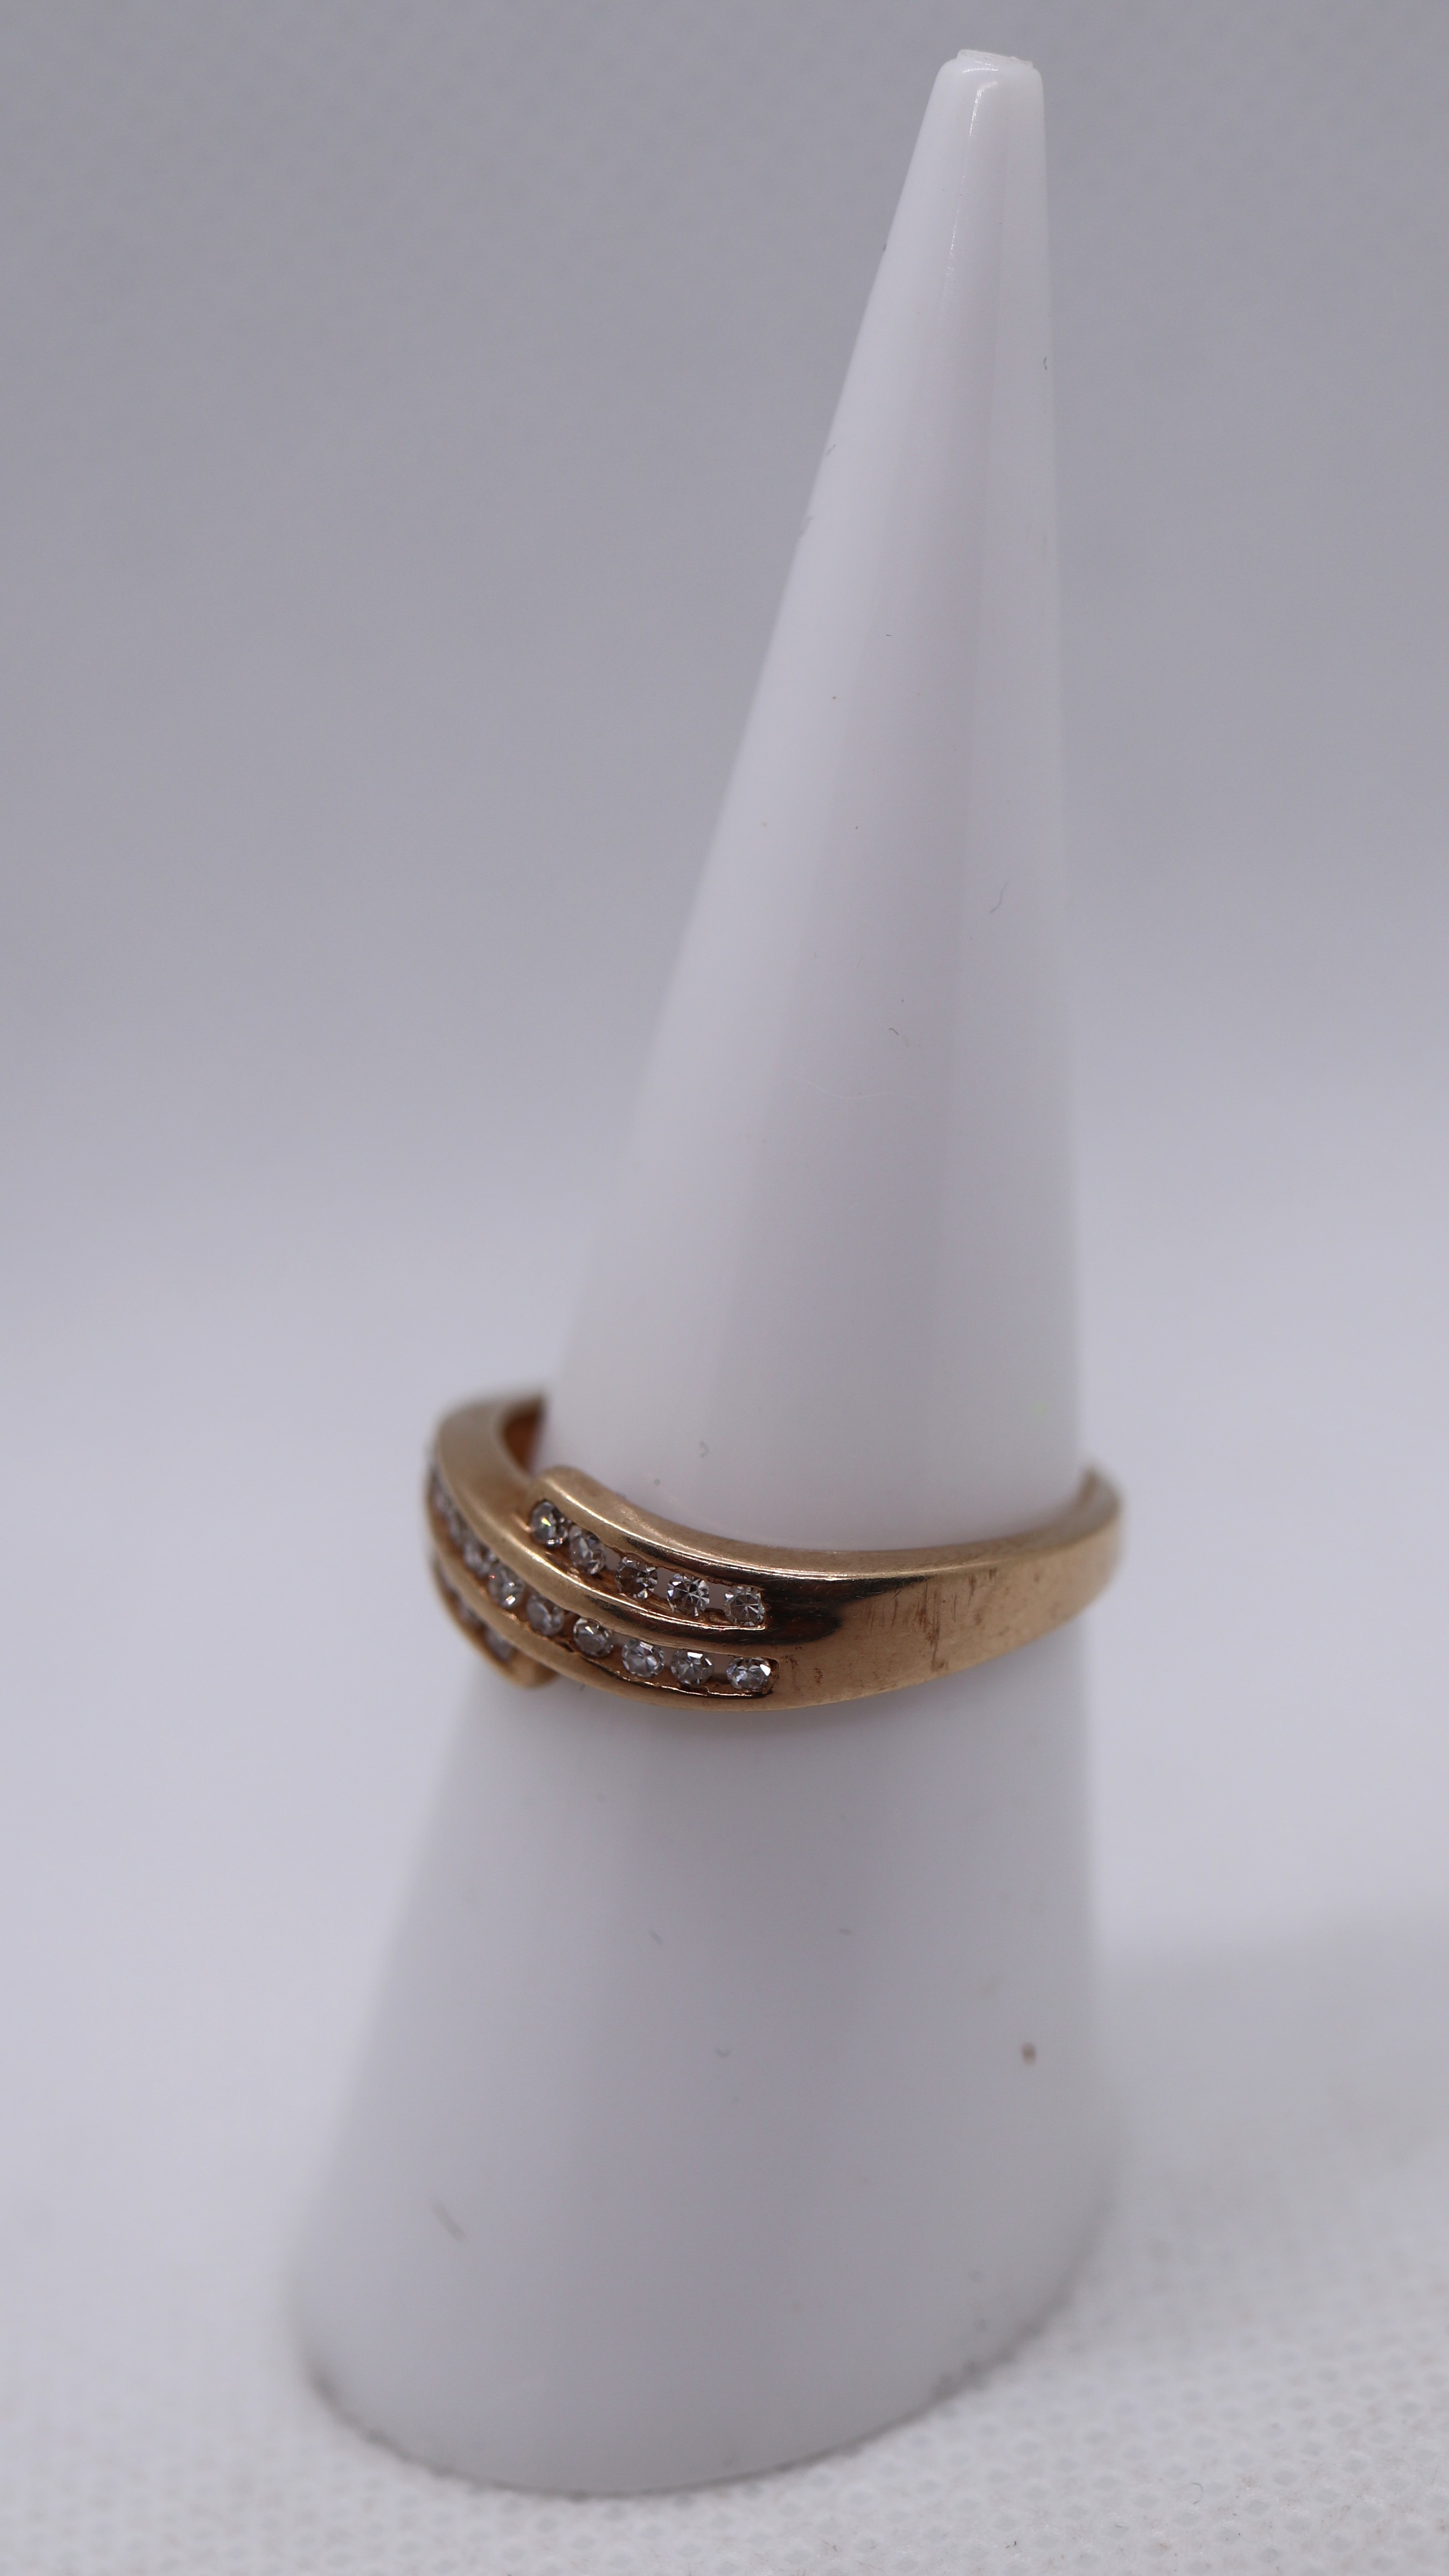 9ct gold channel set diamond ring - Size M - Image 2 of 3